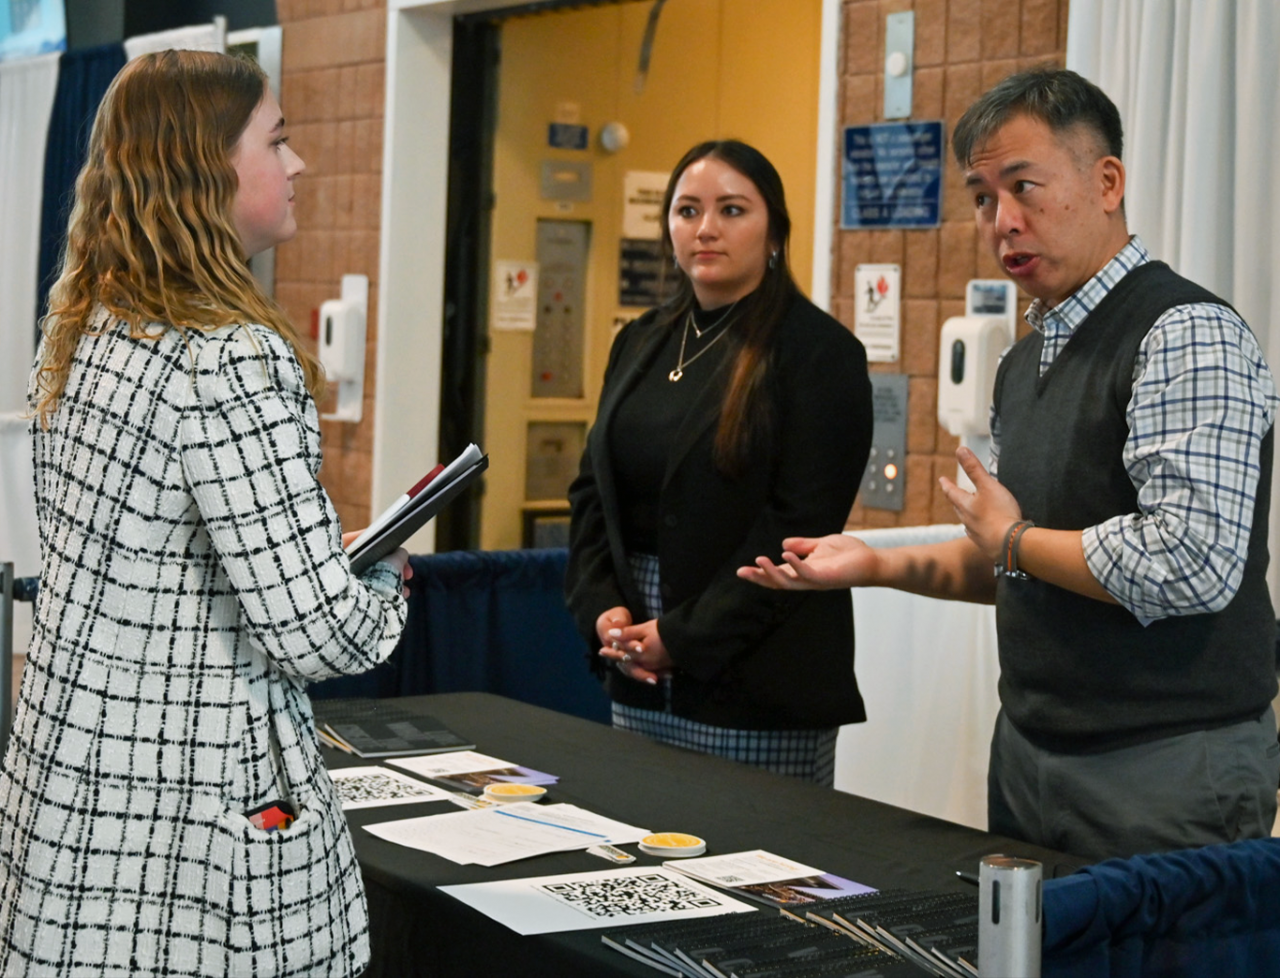 A Stuckeman School student at left holding a portfolio talks with two professional firm representatives who are standing behind a table at the 2024 Career Day in the Bryce Jordan Center.